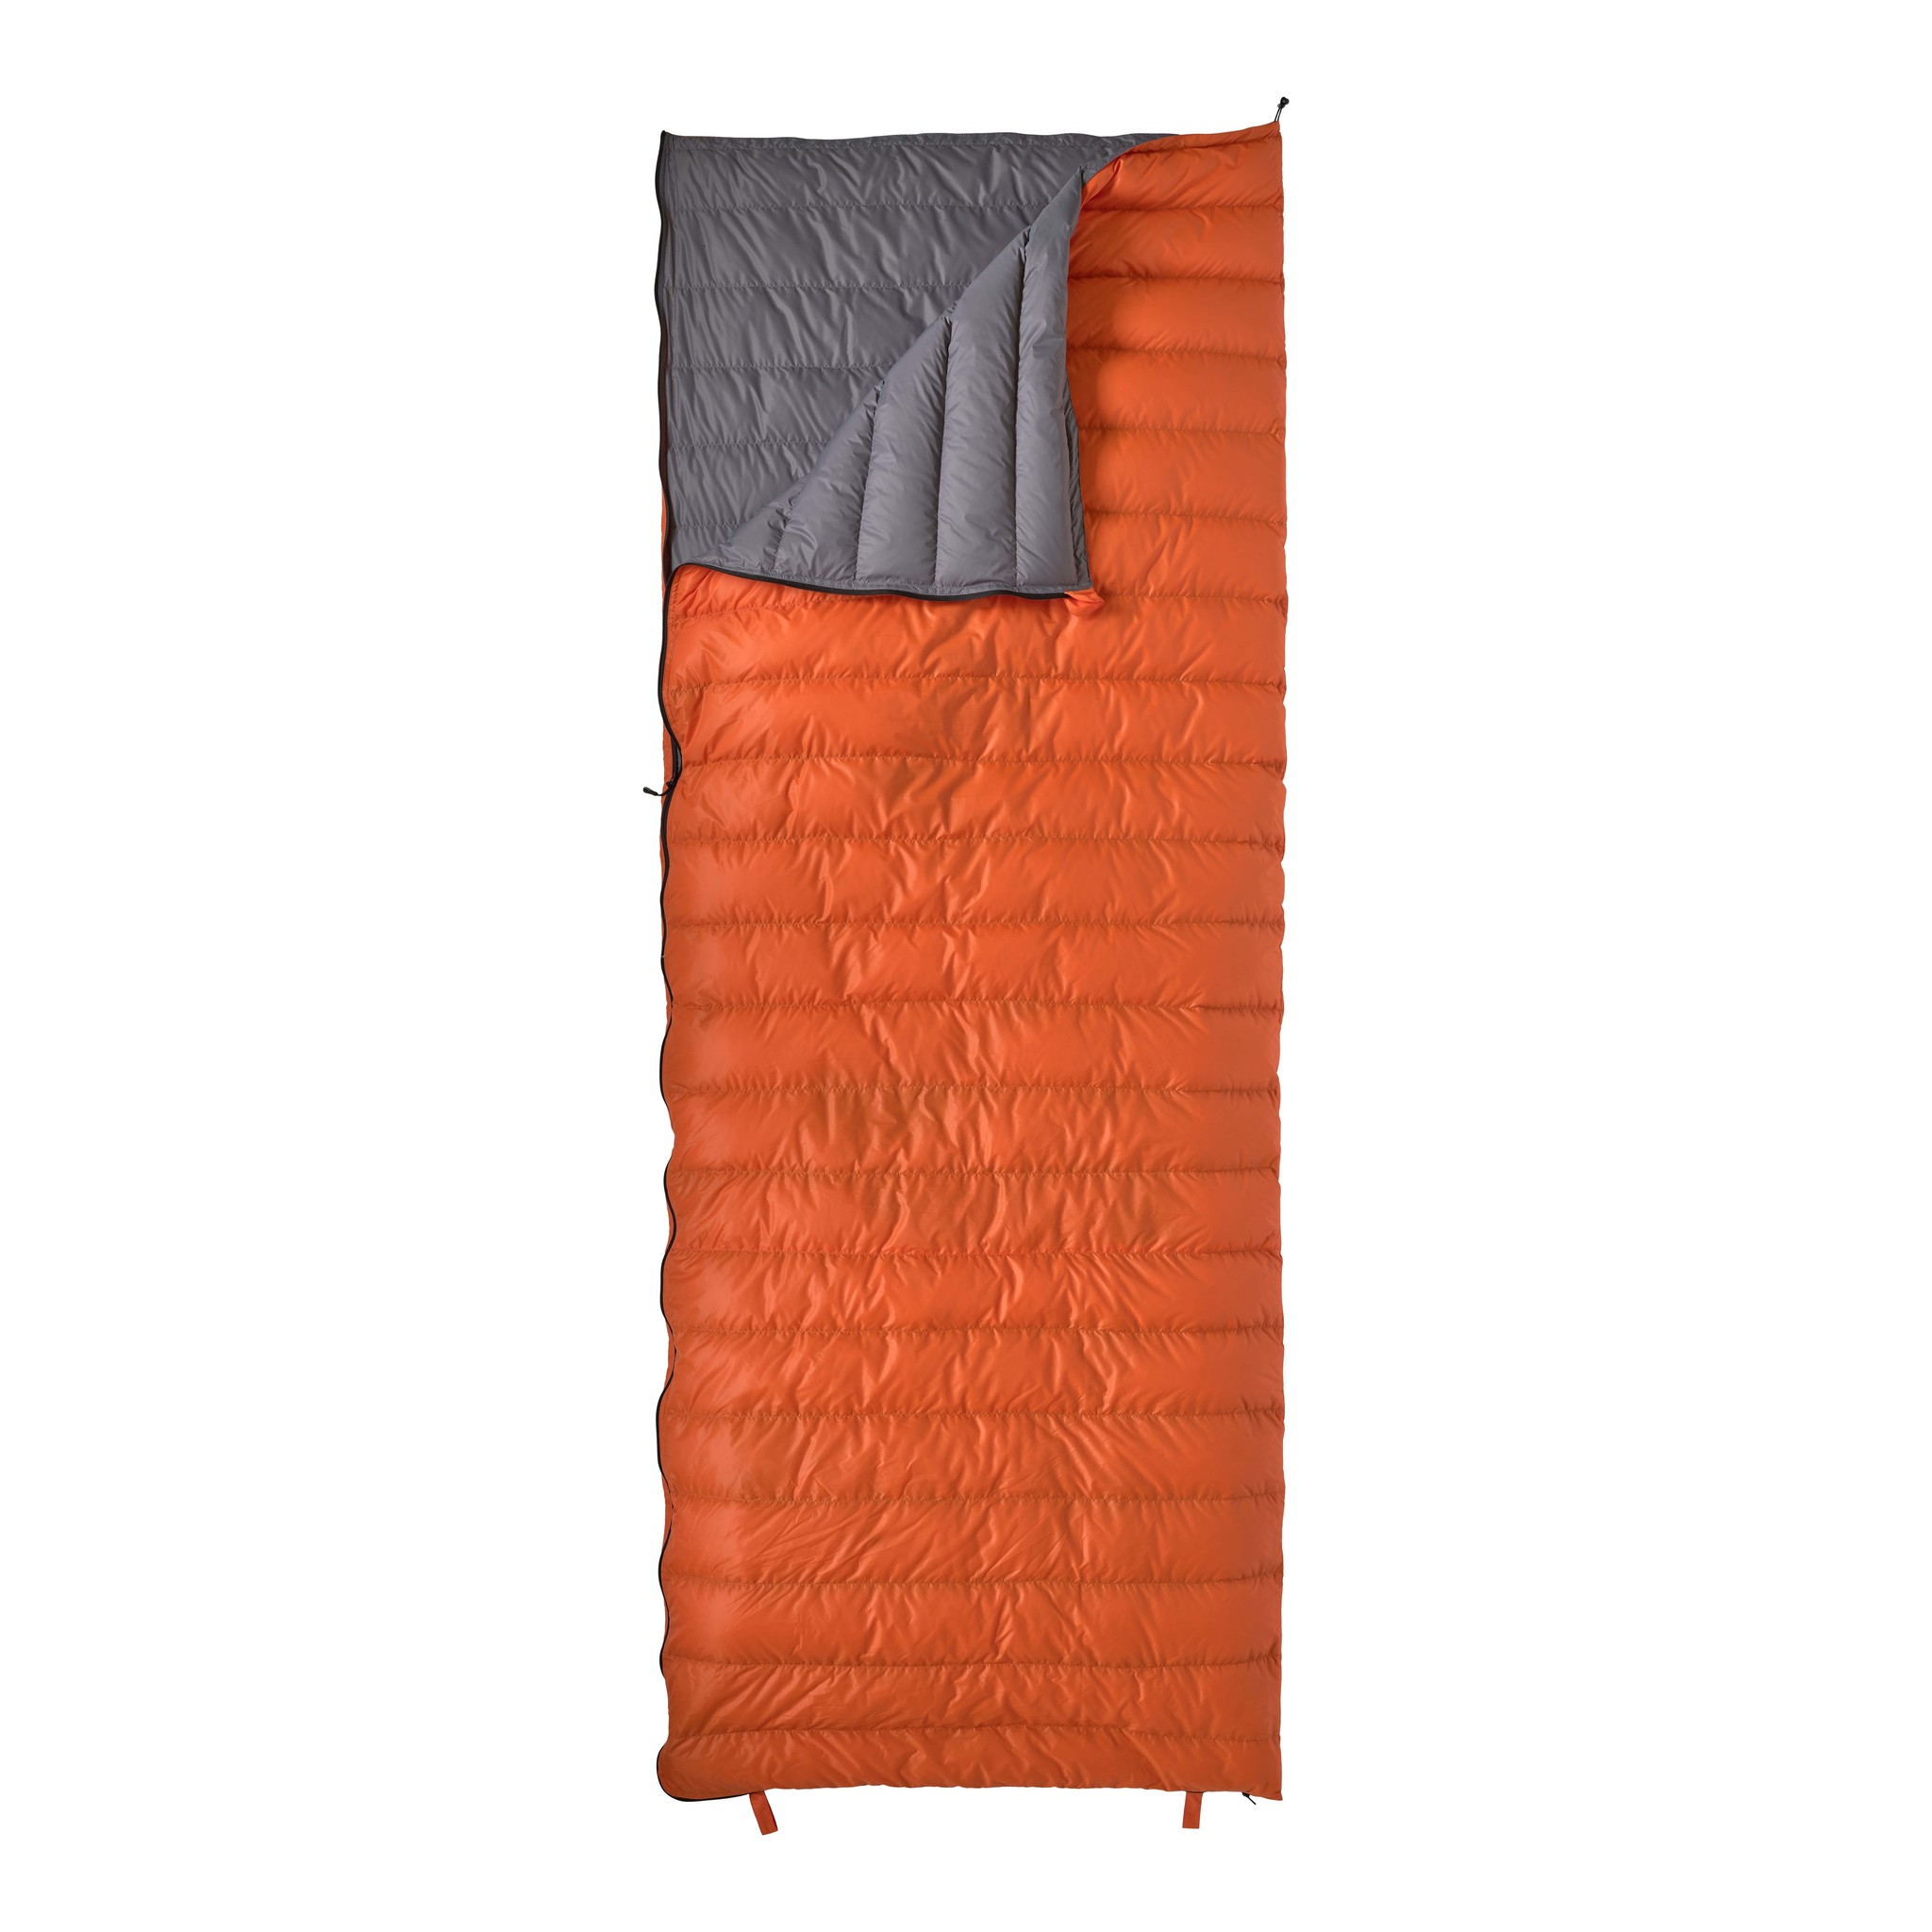 LOWLAND OUTDOOR® Super compact 590g - 210x80 +8°C Sleeping Bags